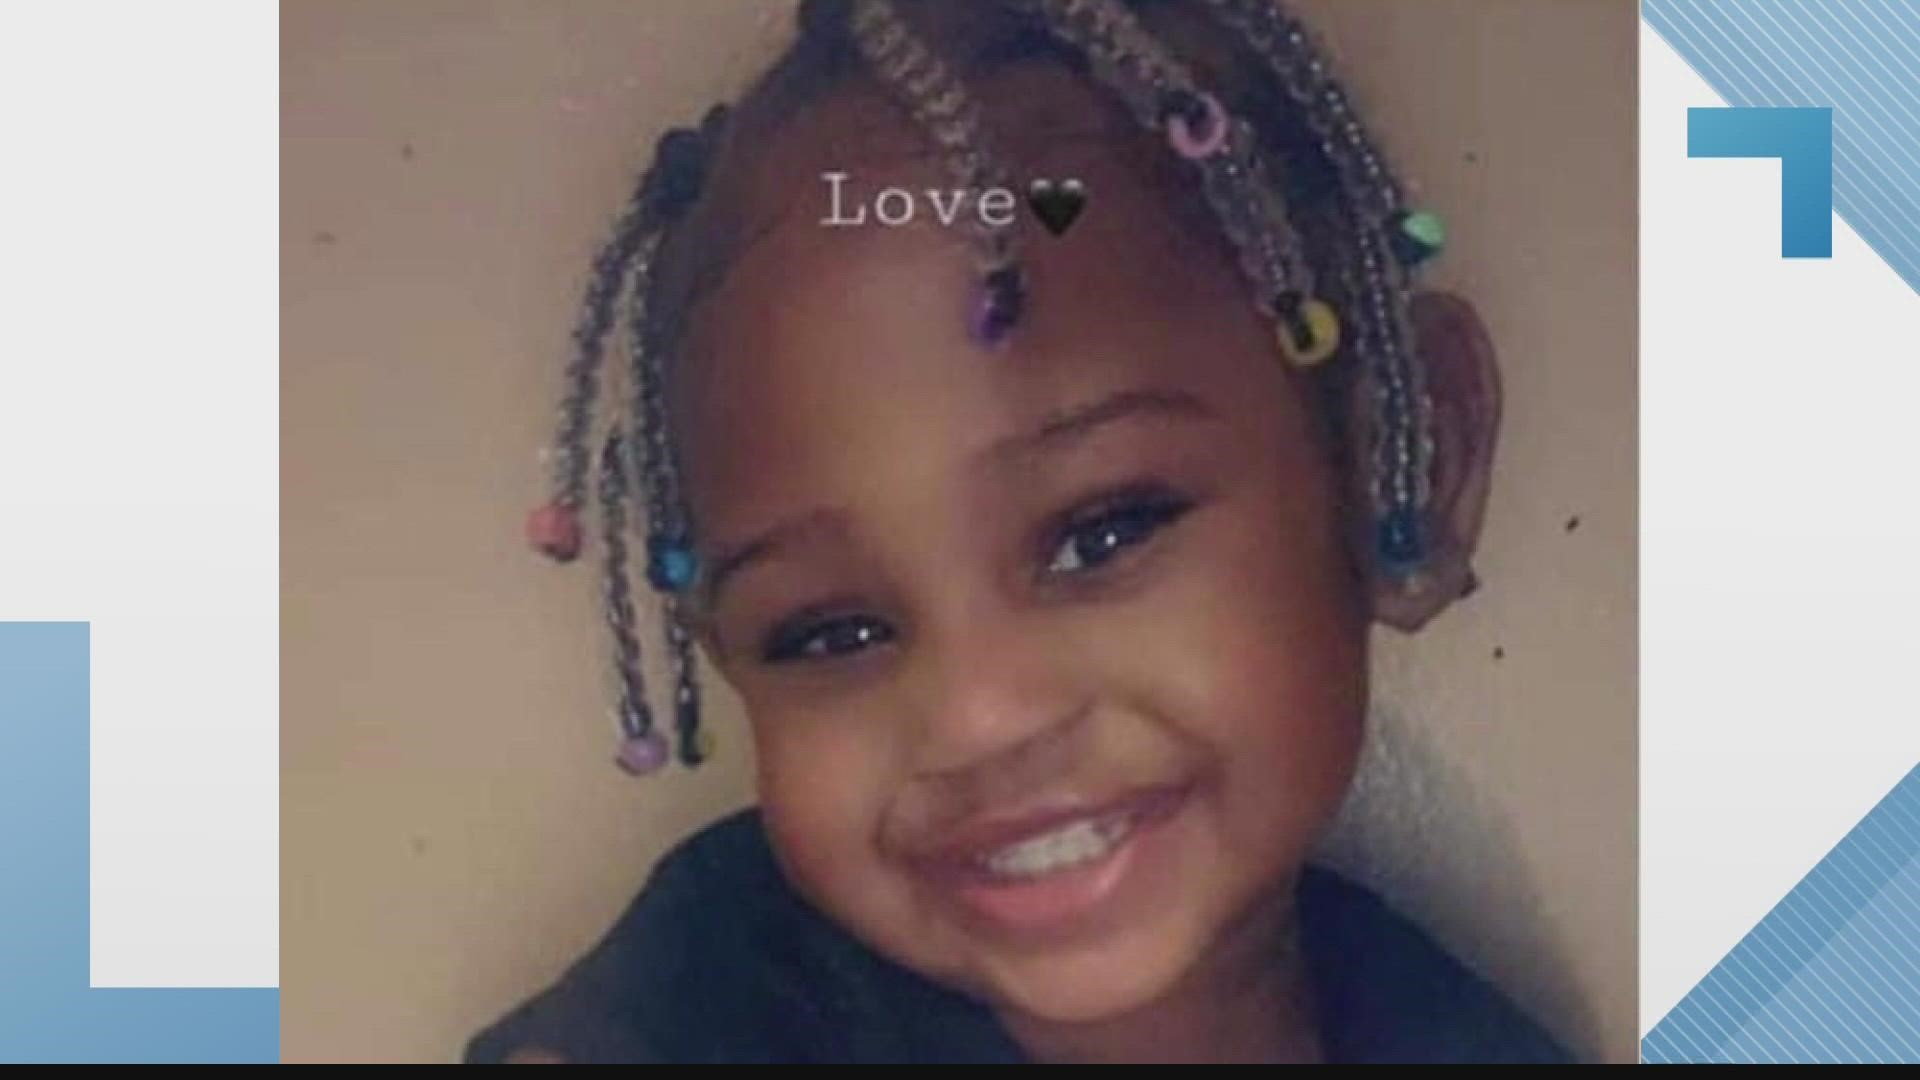 "Calyia loved to play. She was very intelligent. She was just an innocent child watching TV and she didn't deserve this," Ernest Moore said of his niece